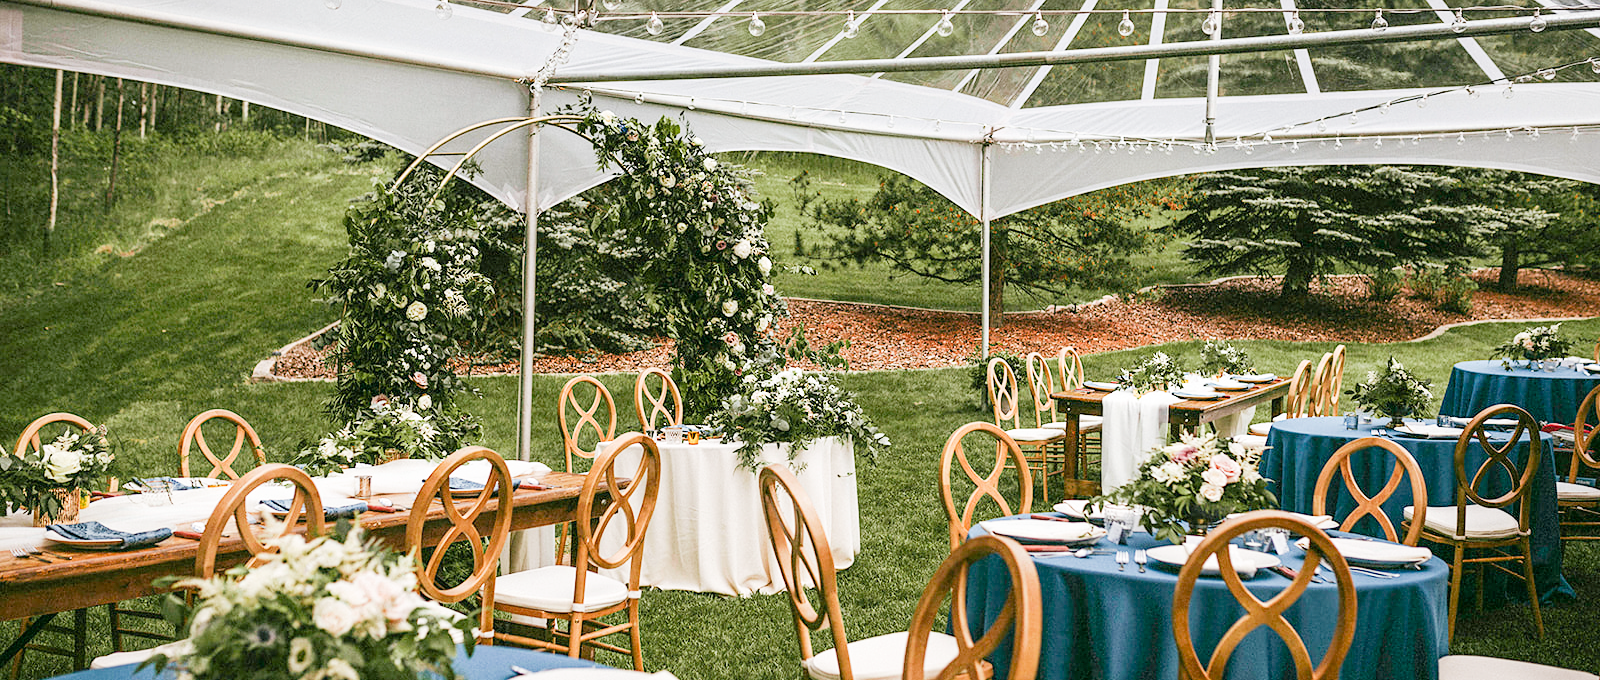 Special Event Rentals - Edmonton showcases spring wedding with infinity grain chairs, tables, tableware, and blue tablecloths under a clear top tent